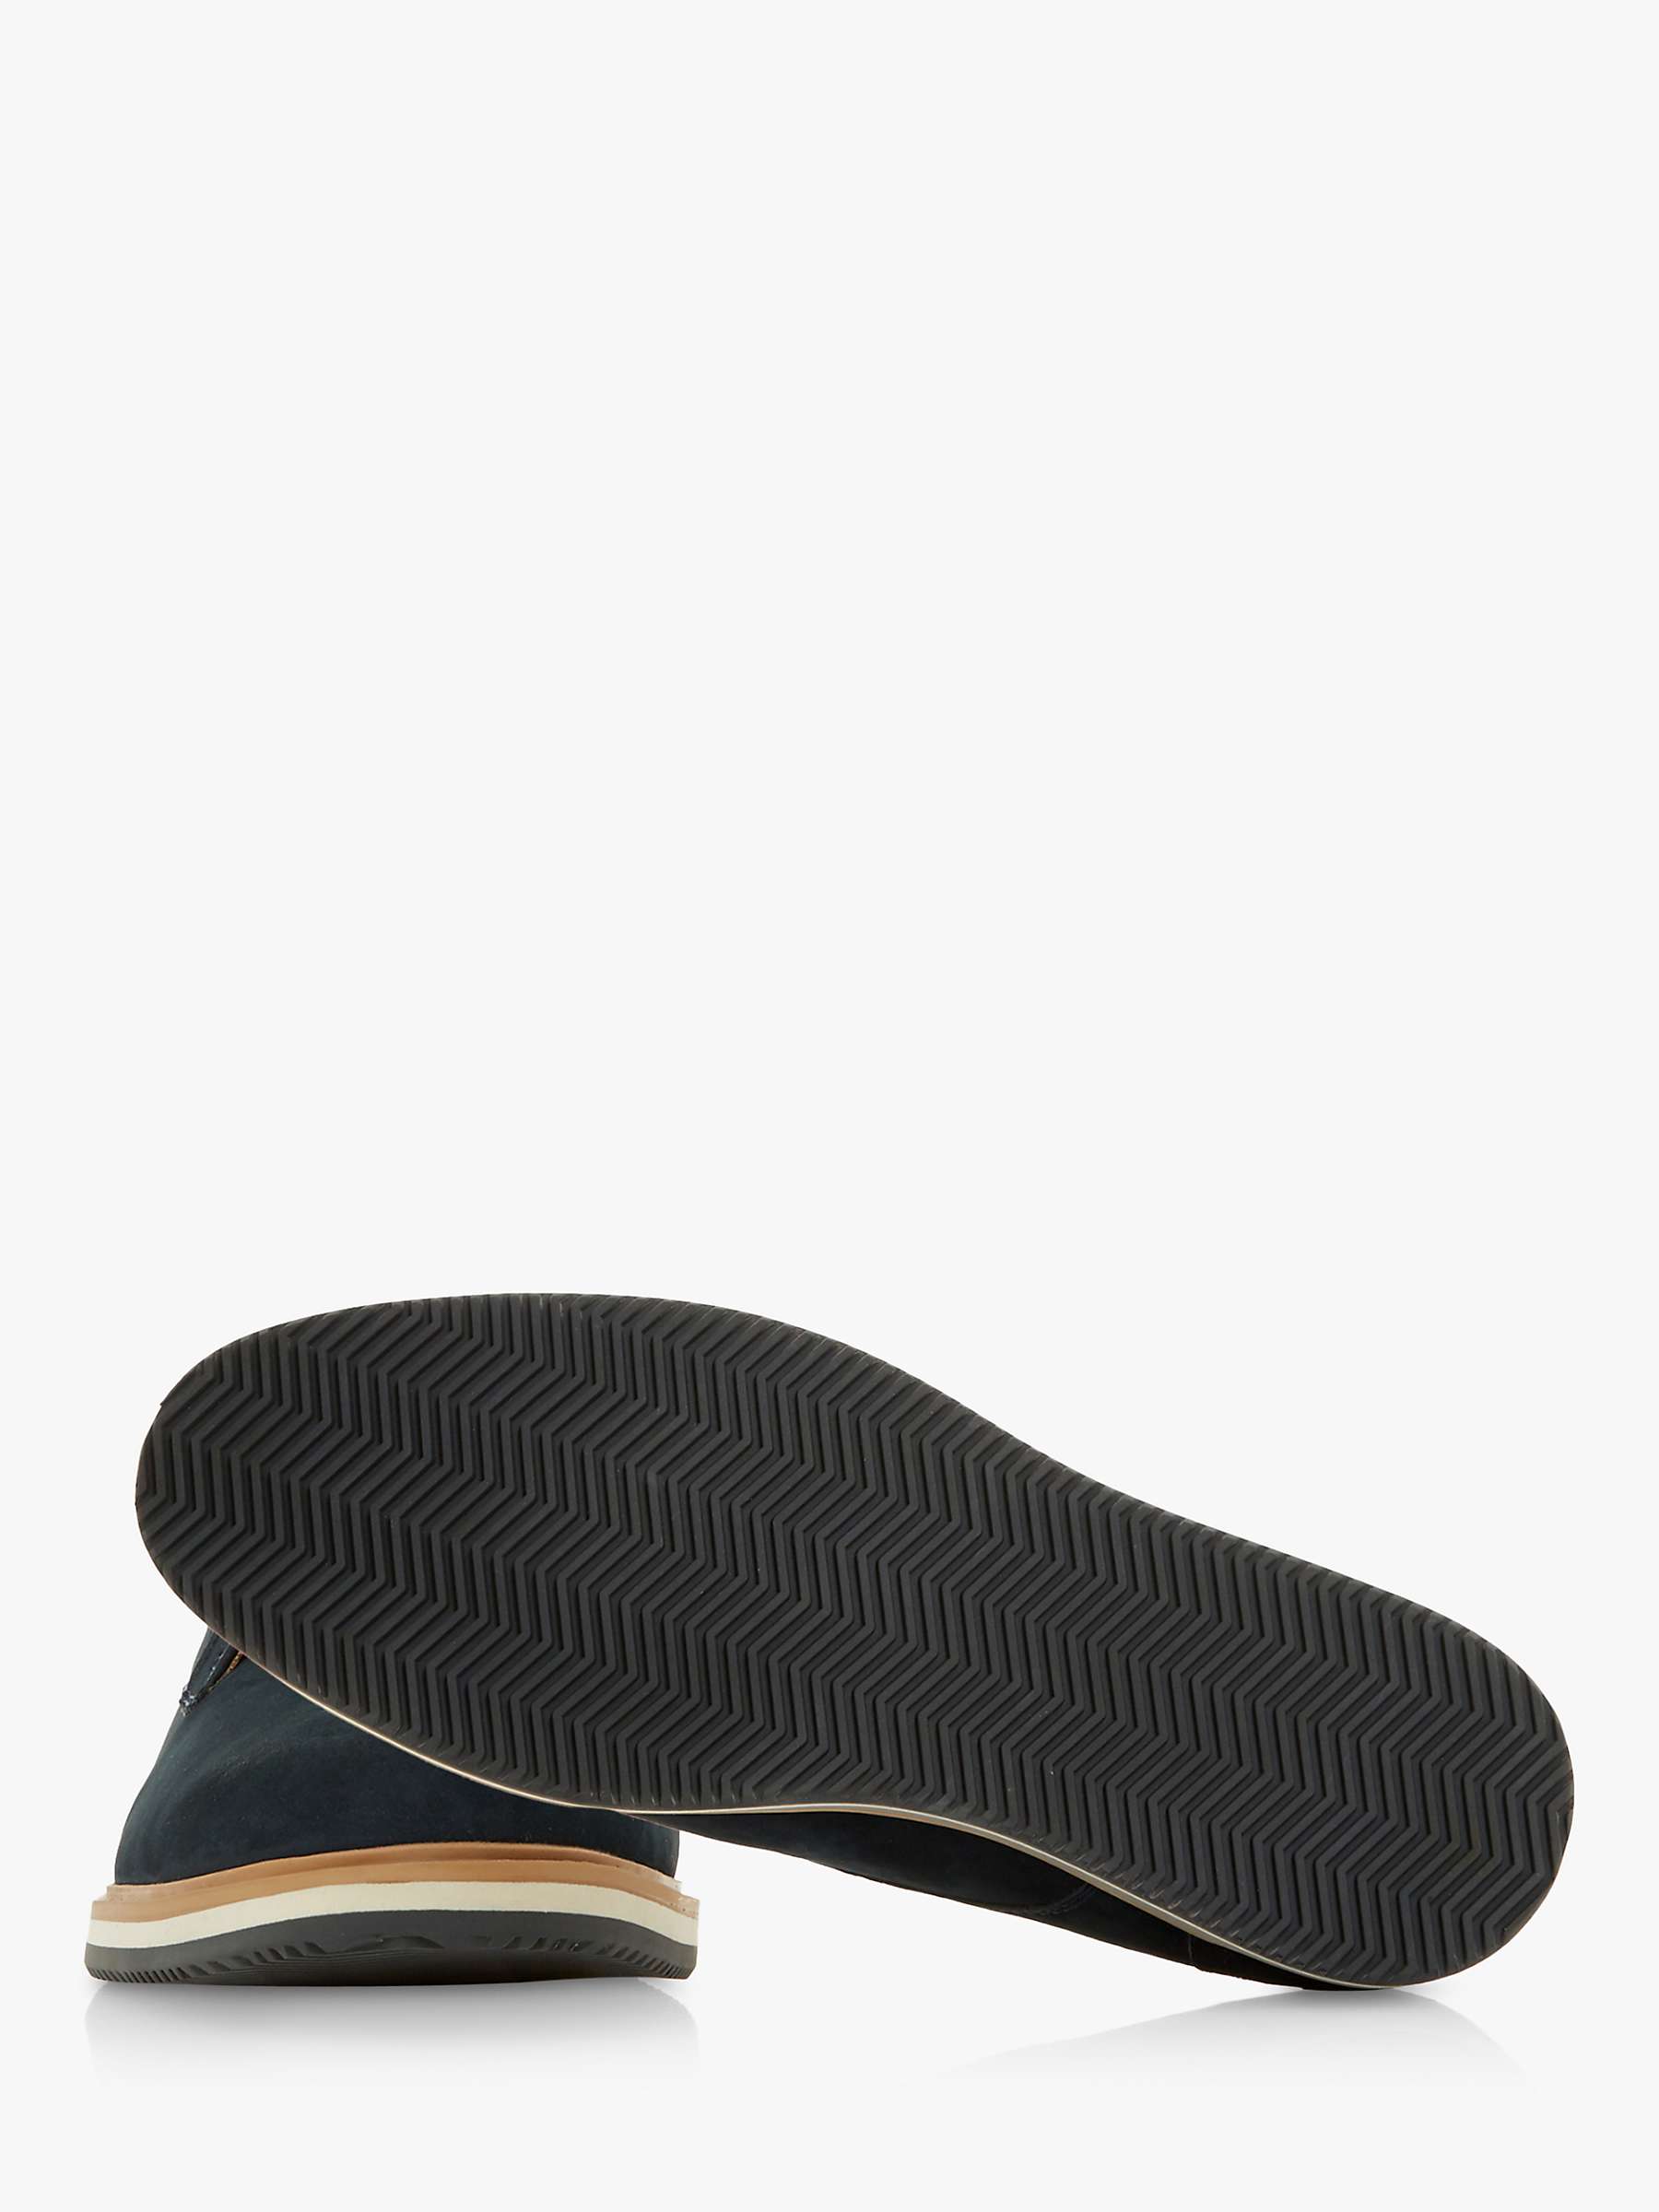 Buy Dune Bucatini Nubuck Wedge Sole Lace Up Shoes Online at johnlewis.com